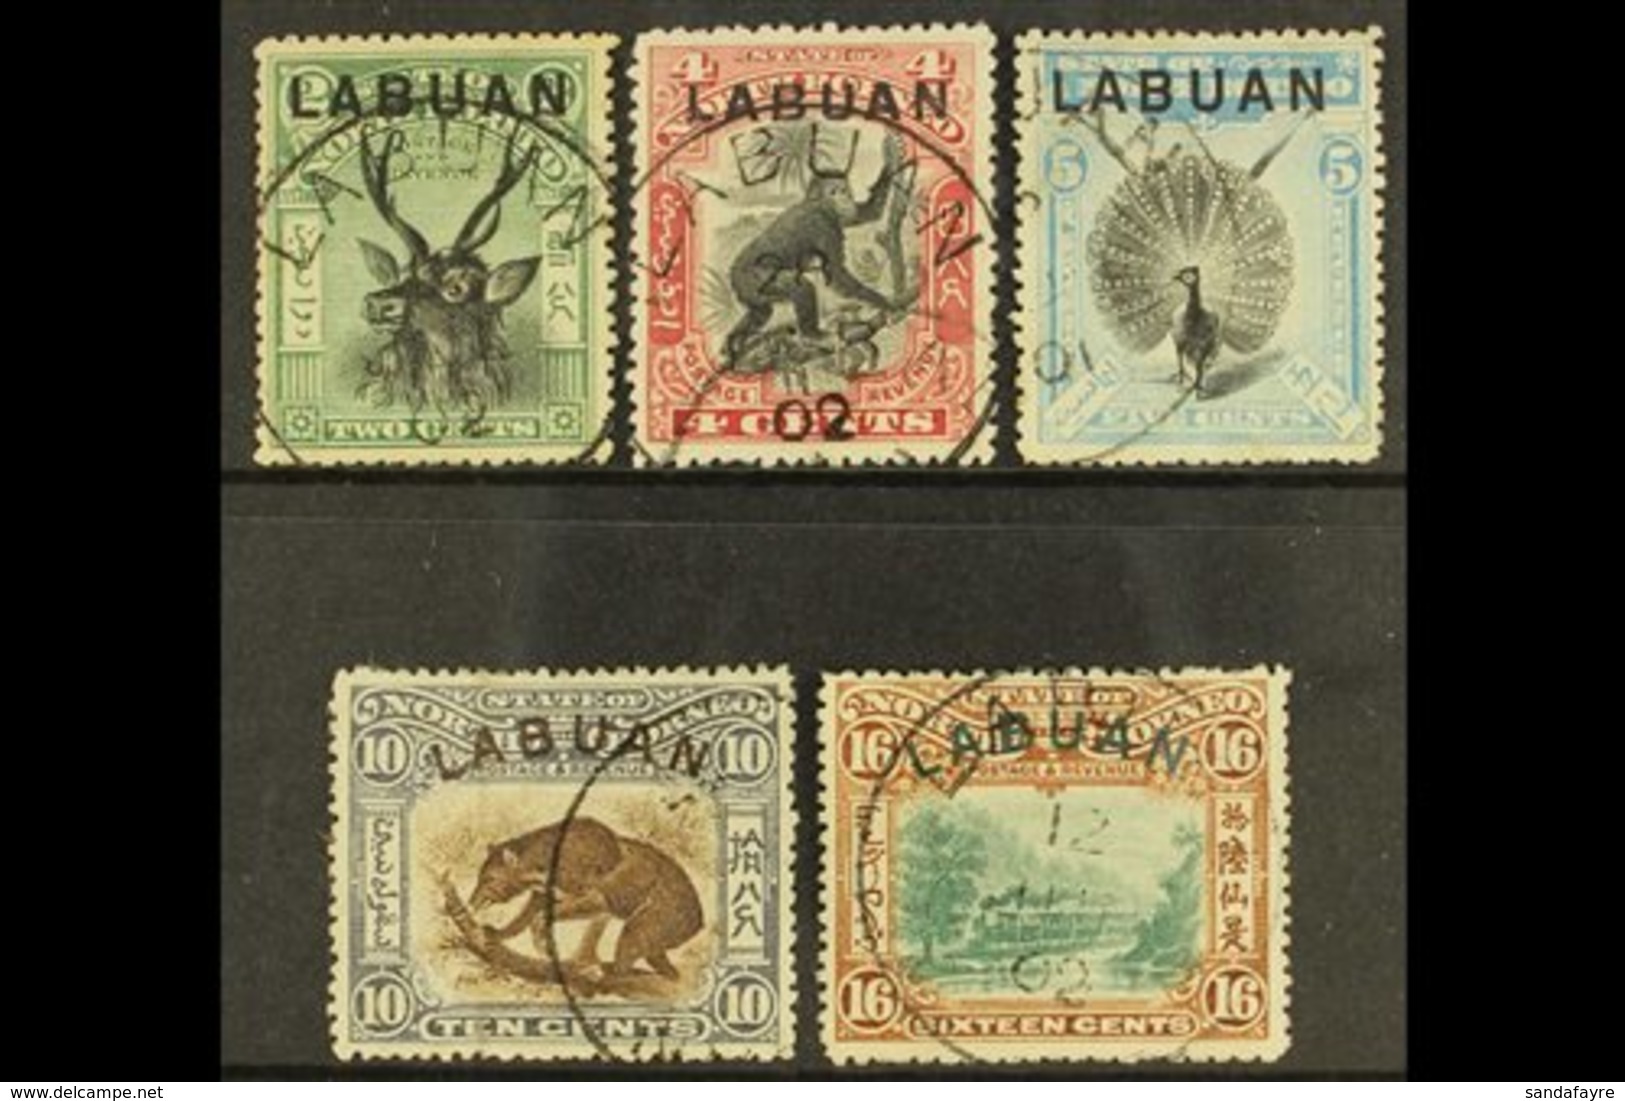 1900-02 Pictorial 2c, 4c Carmine, 5c, 10c And 16c, Between SG 111/116, Cds Used. (5 Stamps) For More Images, Please Visi - North Borneo (...-1963)